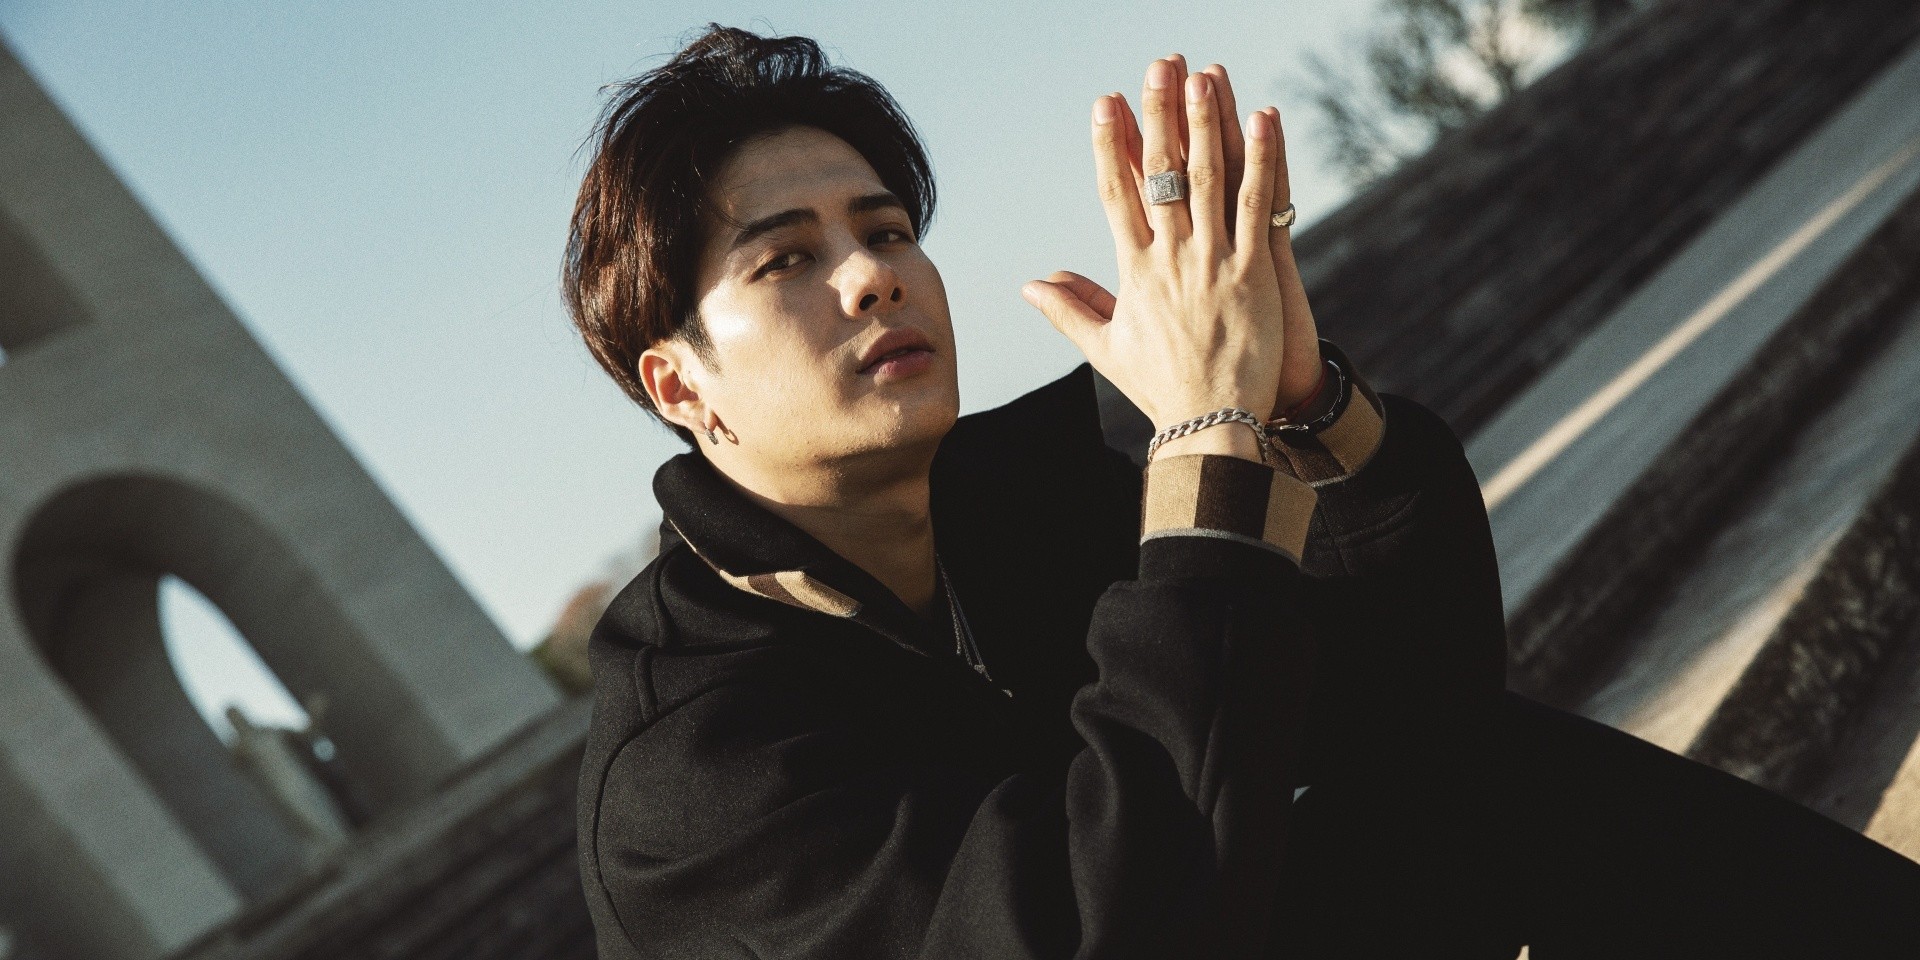 GOT7’s Jackson Wang unveils new single ‘Bullet to the Heart’ and music video 